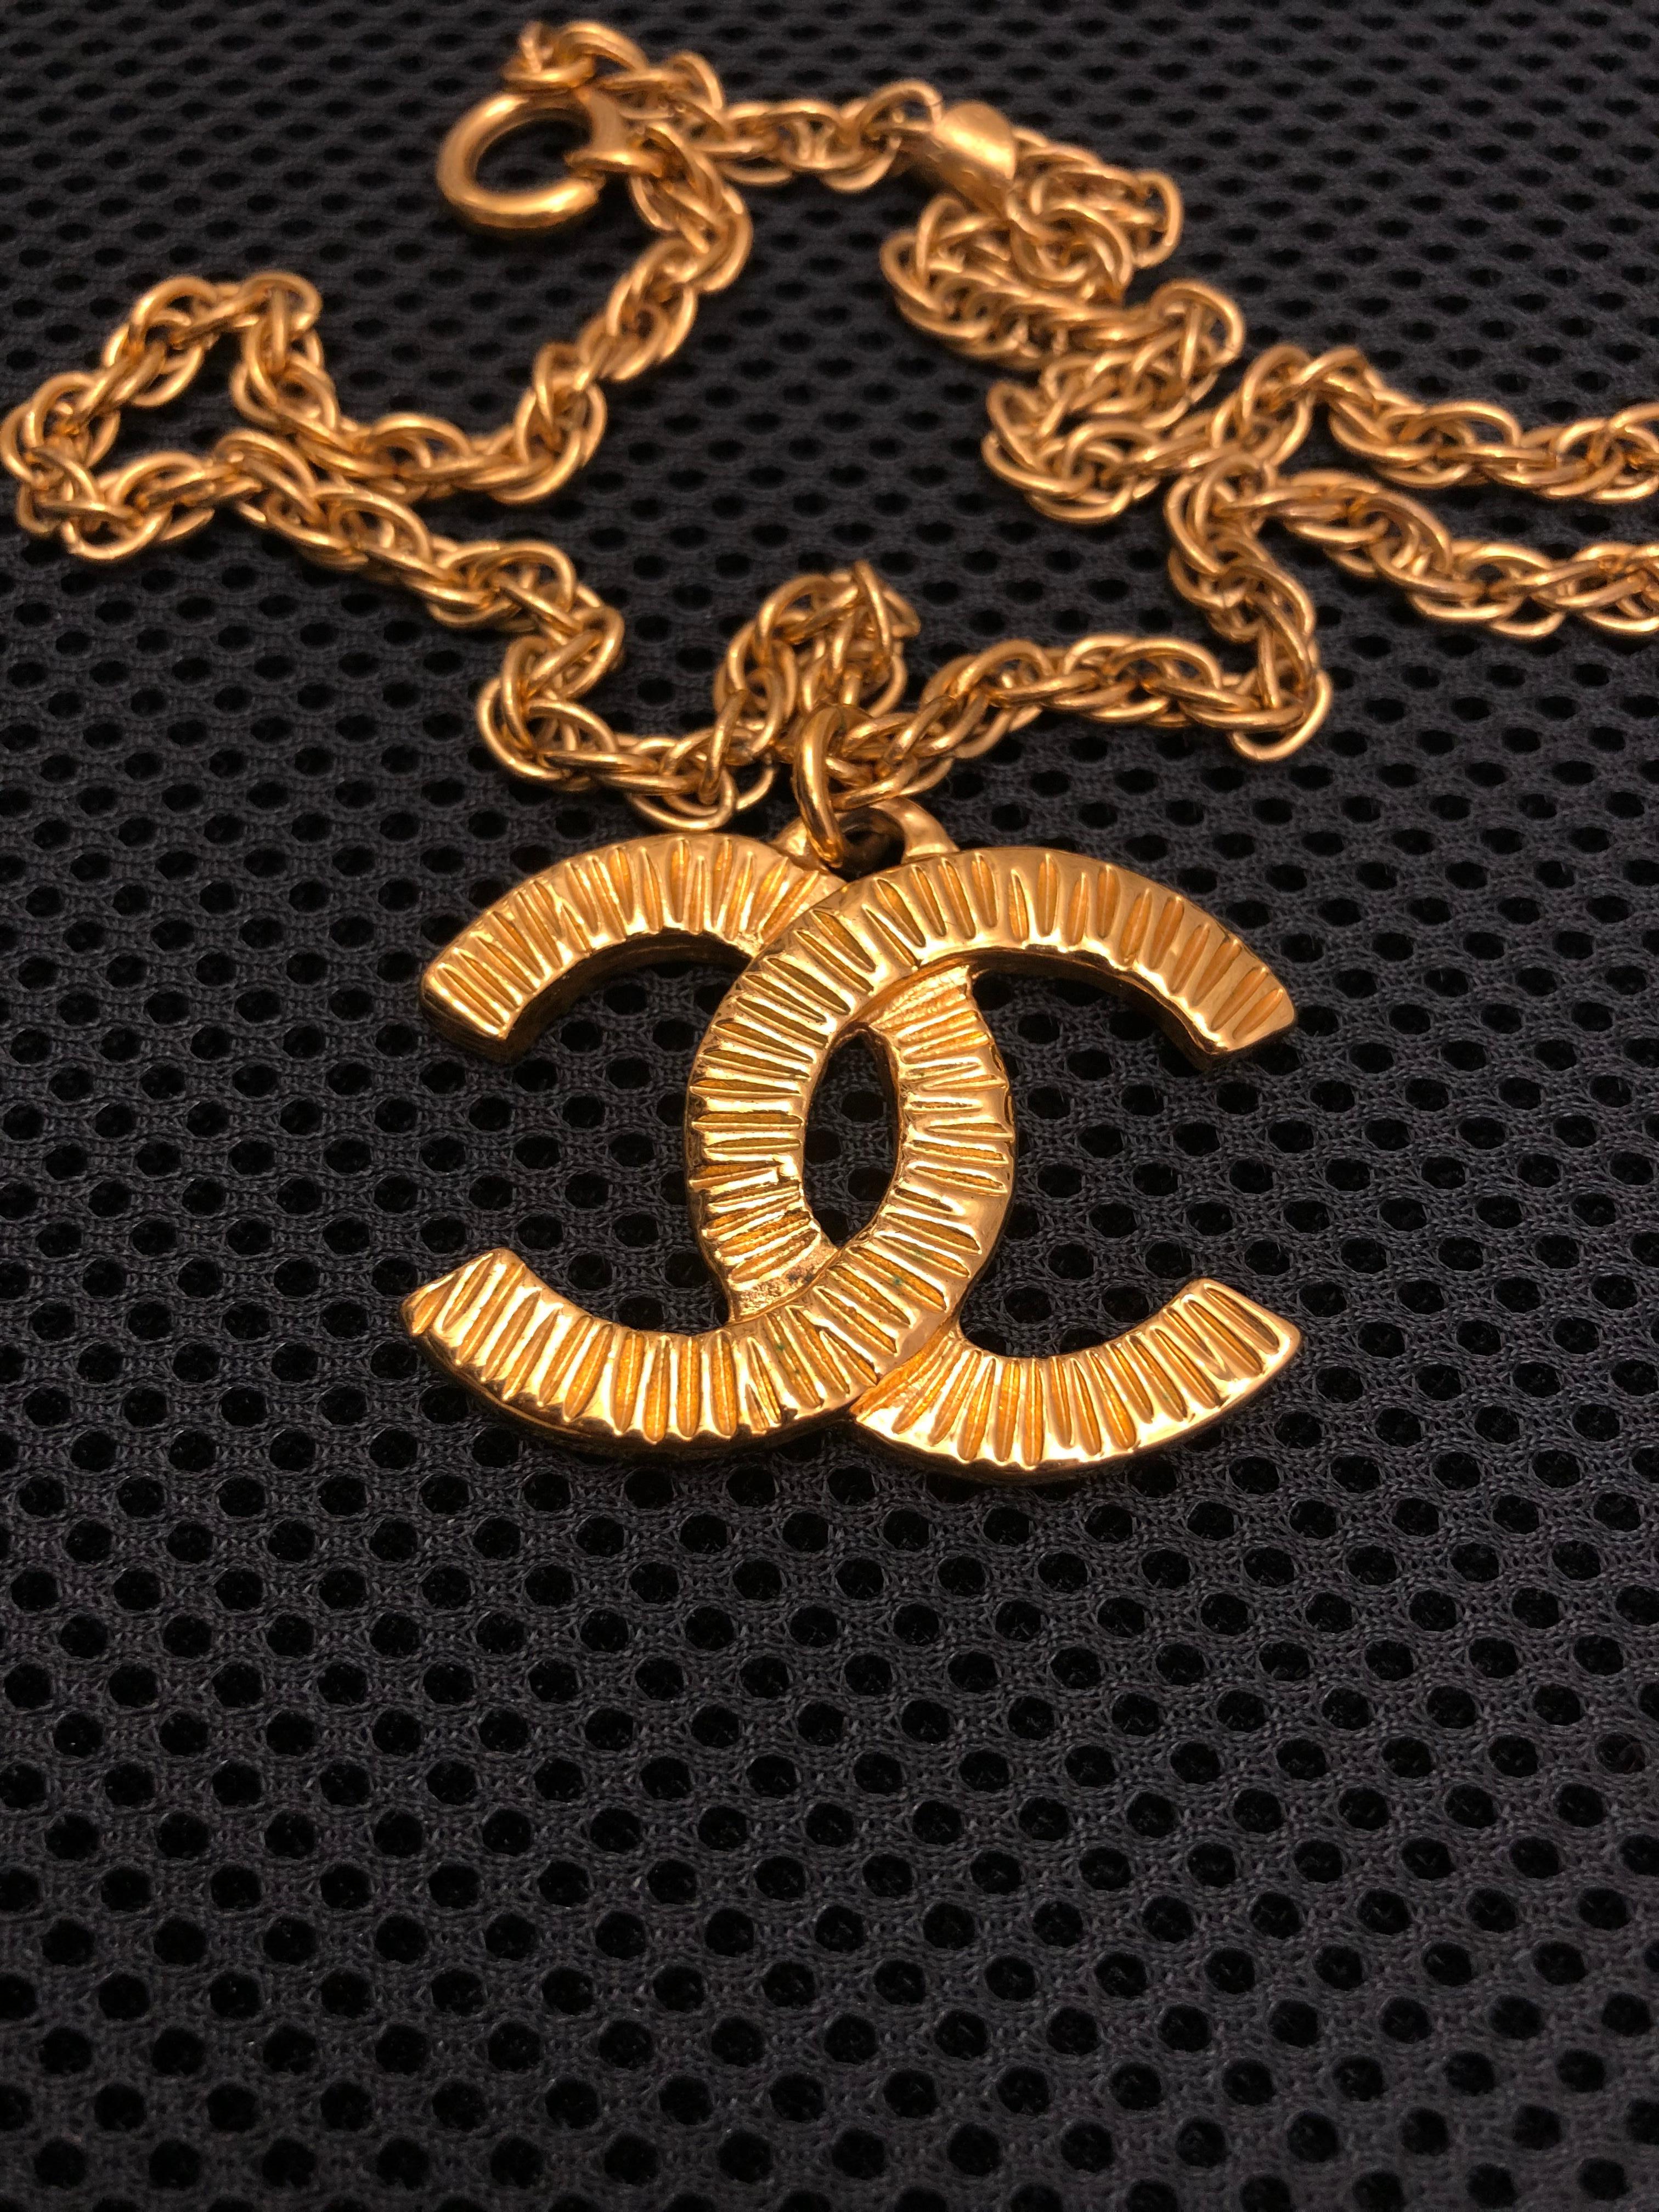 This 1993 vintage CHANEL short chain necklace is crafted of gold toned chain featuring a massive textured CC charm. Spring ring closure. Stamped 93P CHANEL made in France. Measures approximately 44 cm Charm diameter 4.0 x 3.2 cm. Comes with